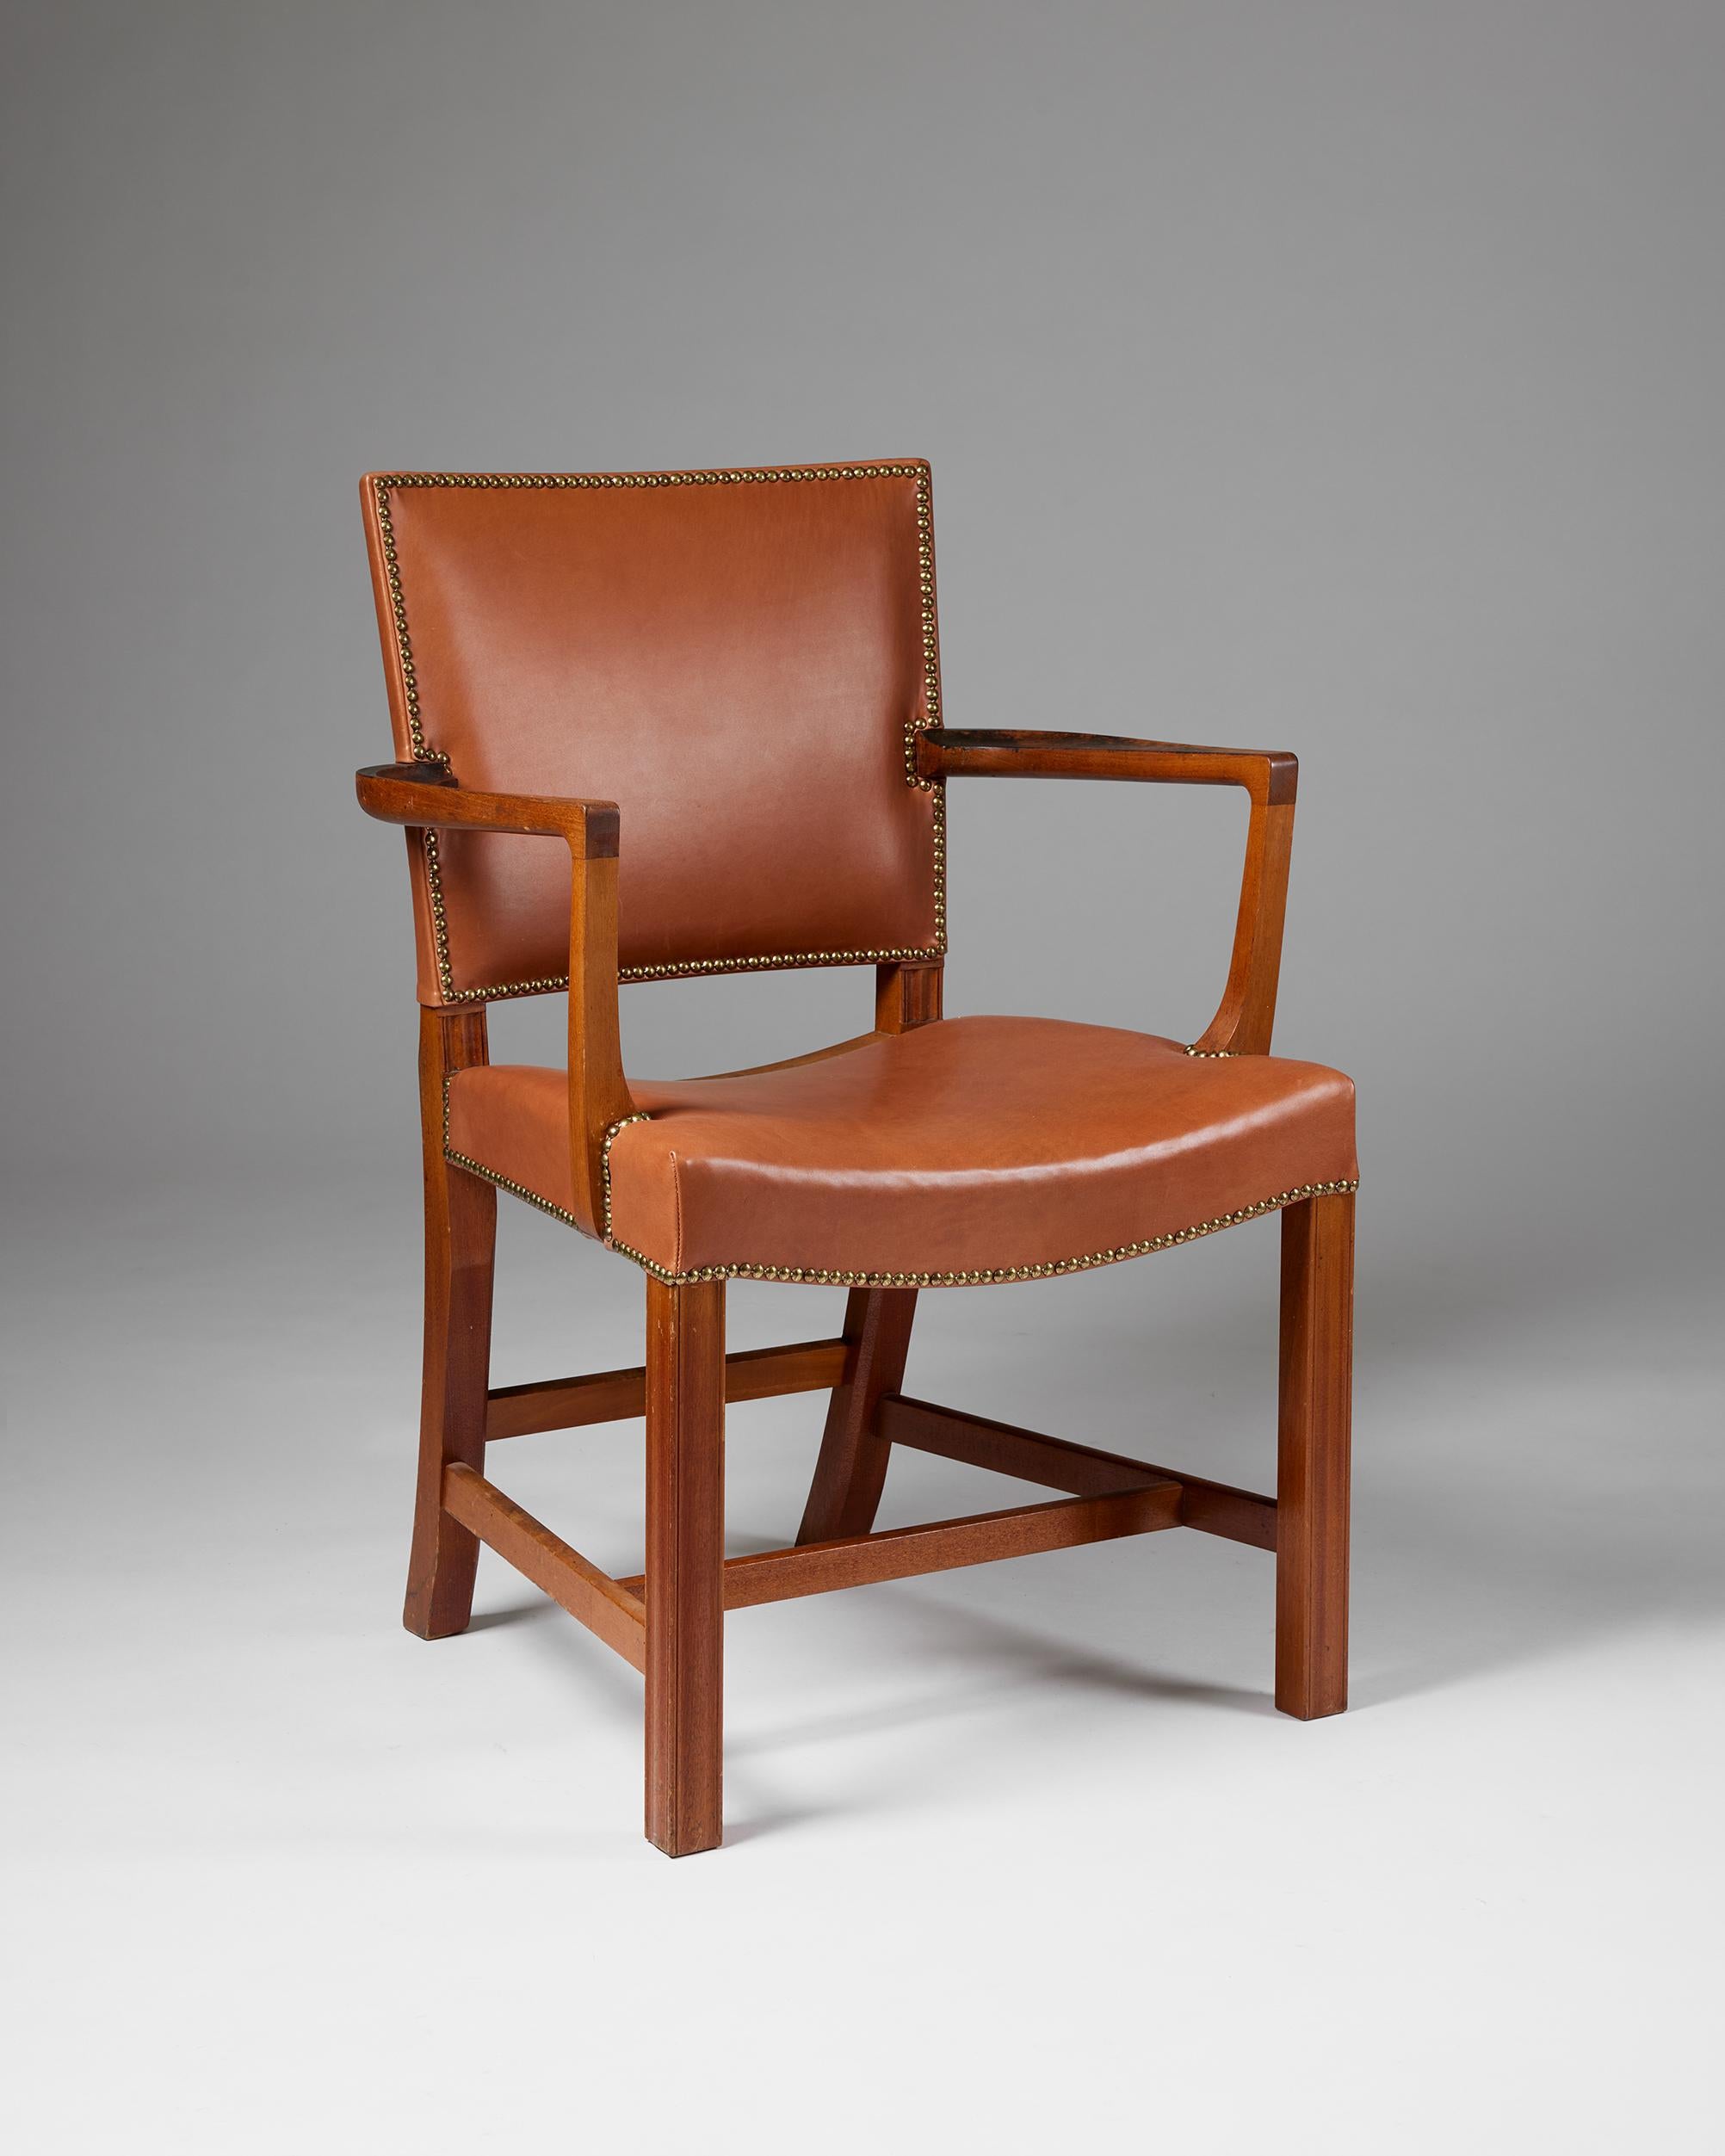 Armchair ‘The Red Chair’ Model 3758A designed by Kaare Klint for Rud. Rasmussen,
Denmark, 1930s.

Mahogany, leather upholstery, and brass.

This example was produced after 1930.

The design detailing of this magnificent chair by Kaare Klint,